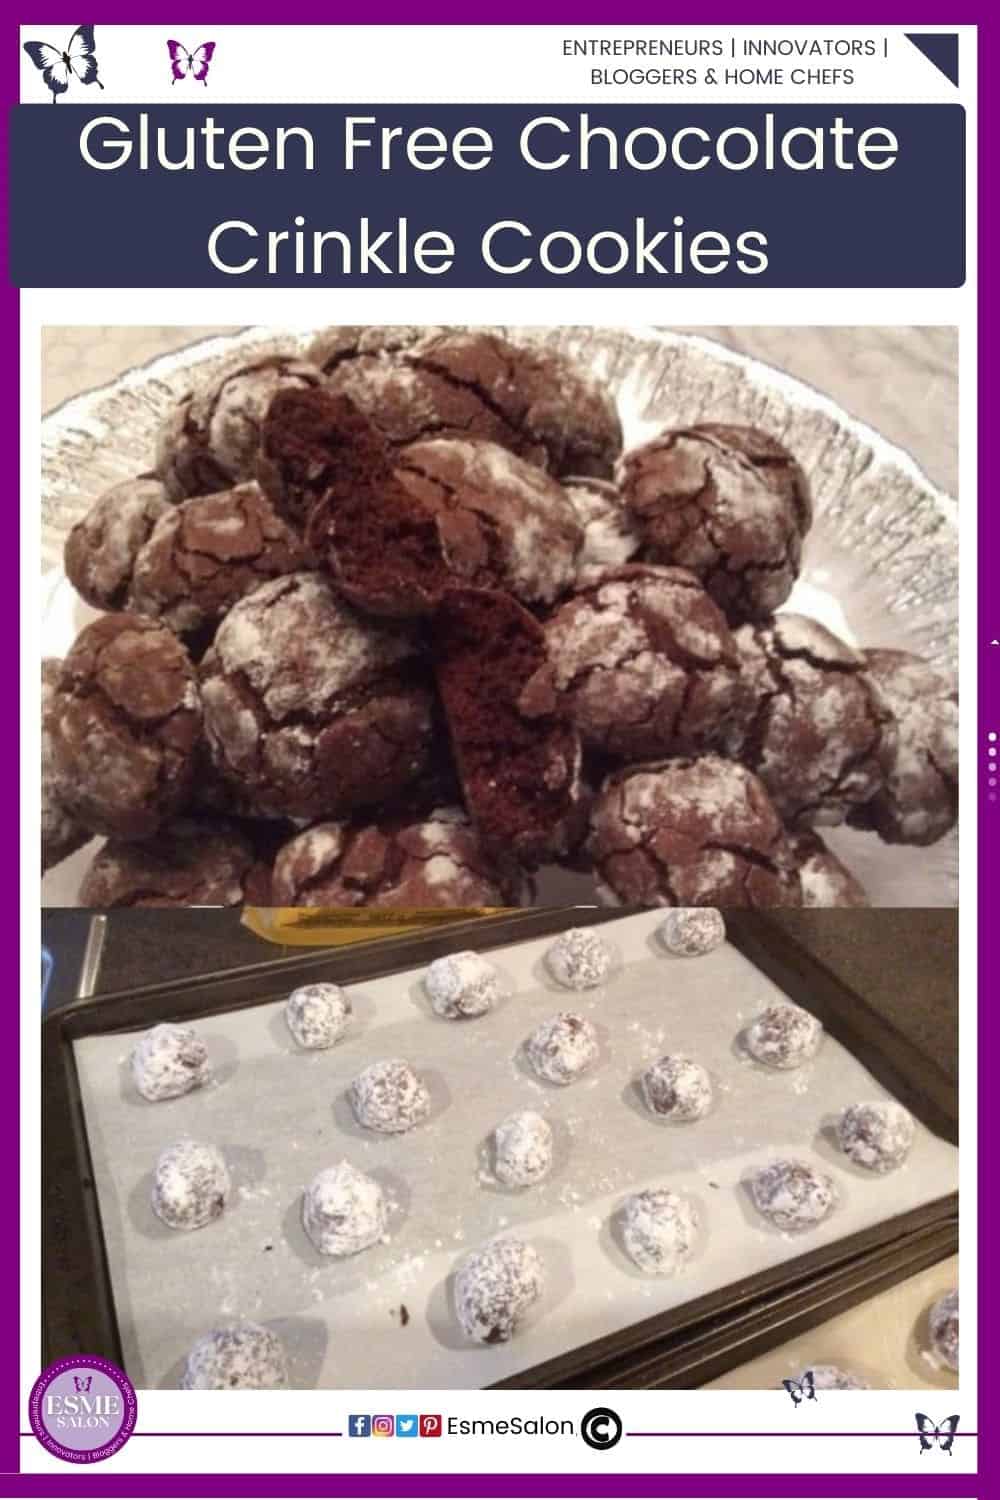 an image of a glass platter with baked Gluten Free Chocolate Crinkle Cookies as well as some unbaked on a baking tray